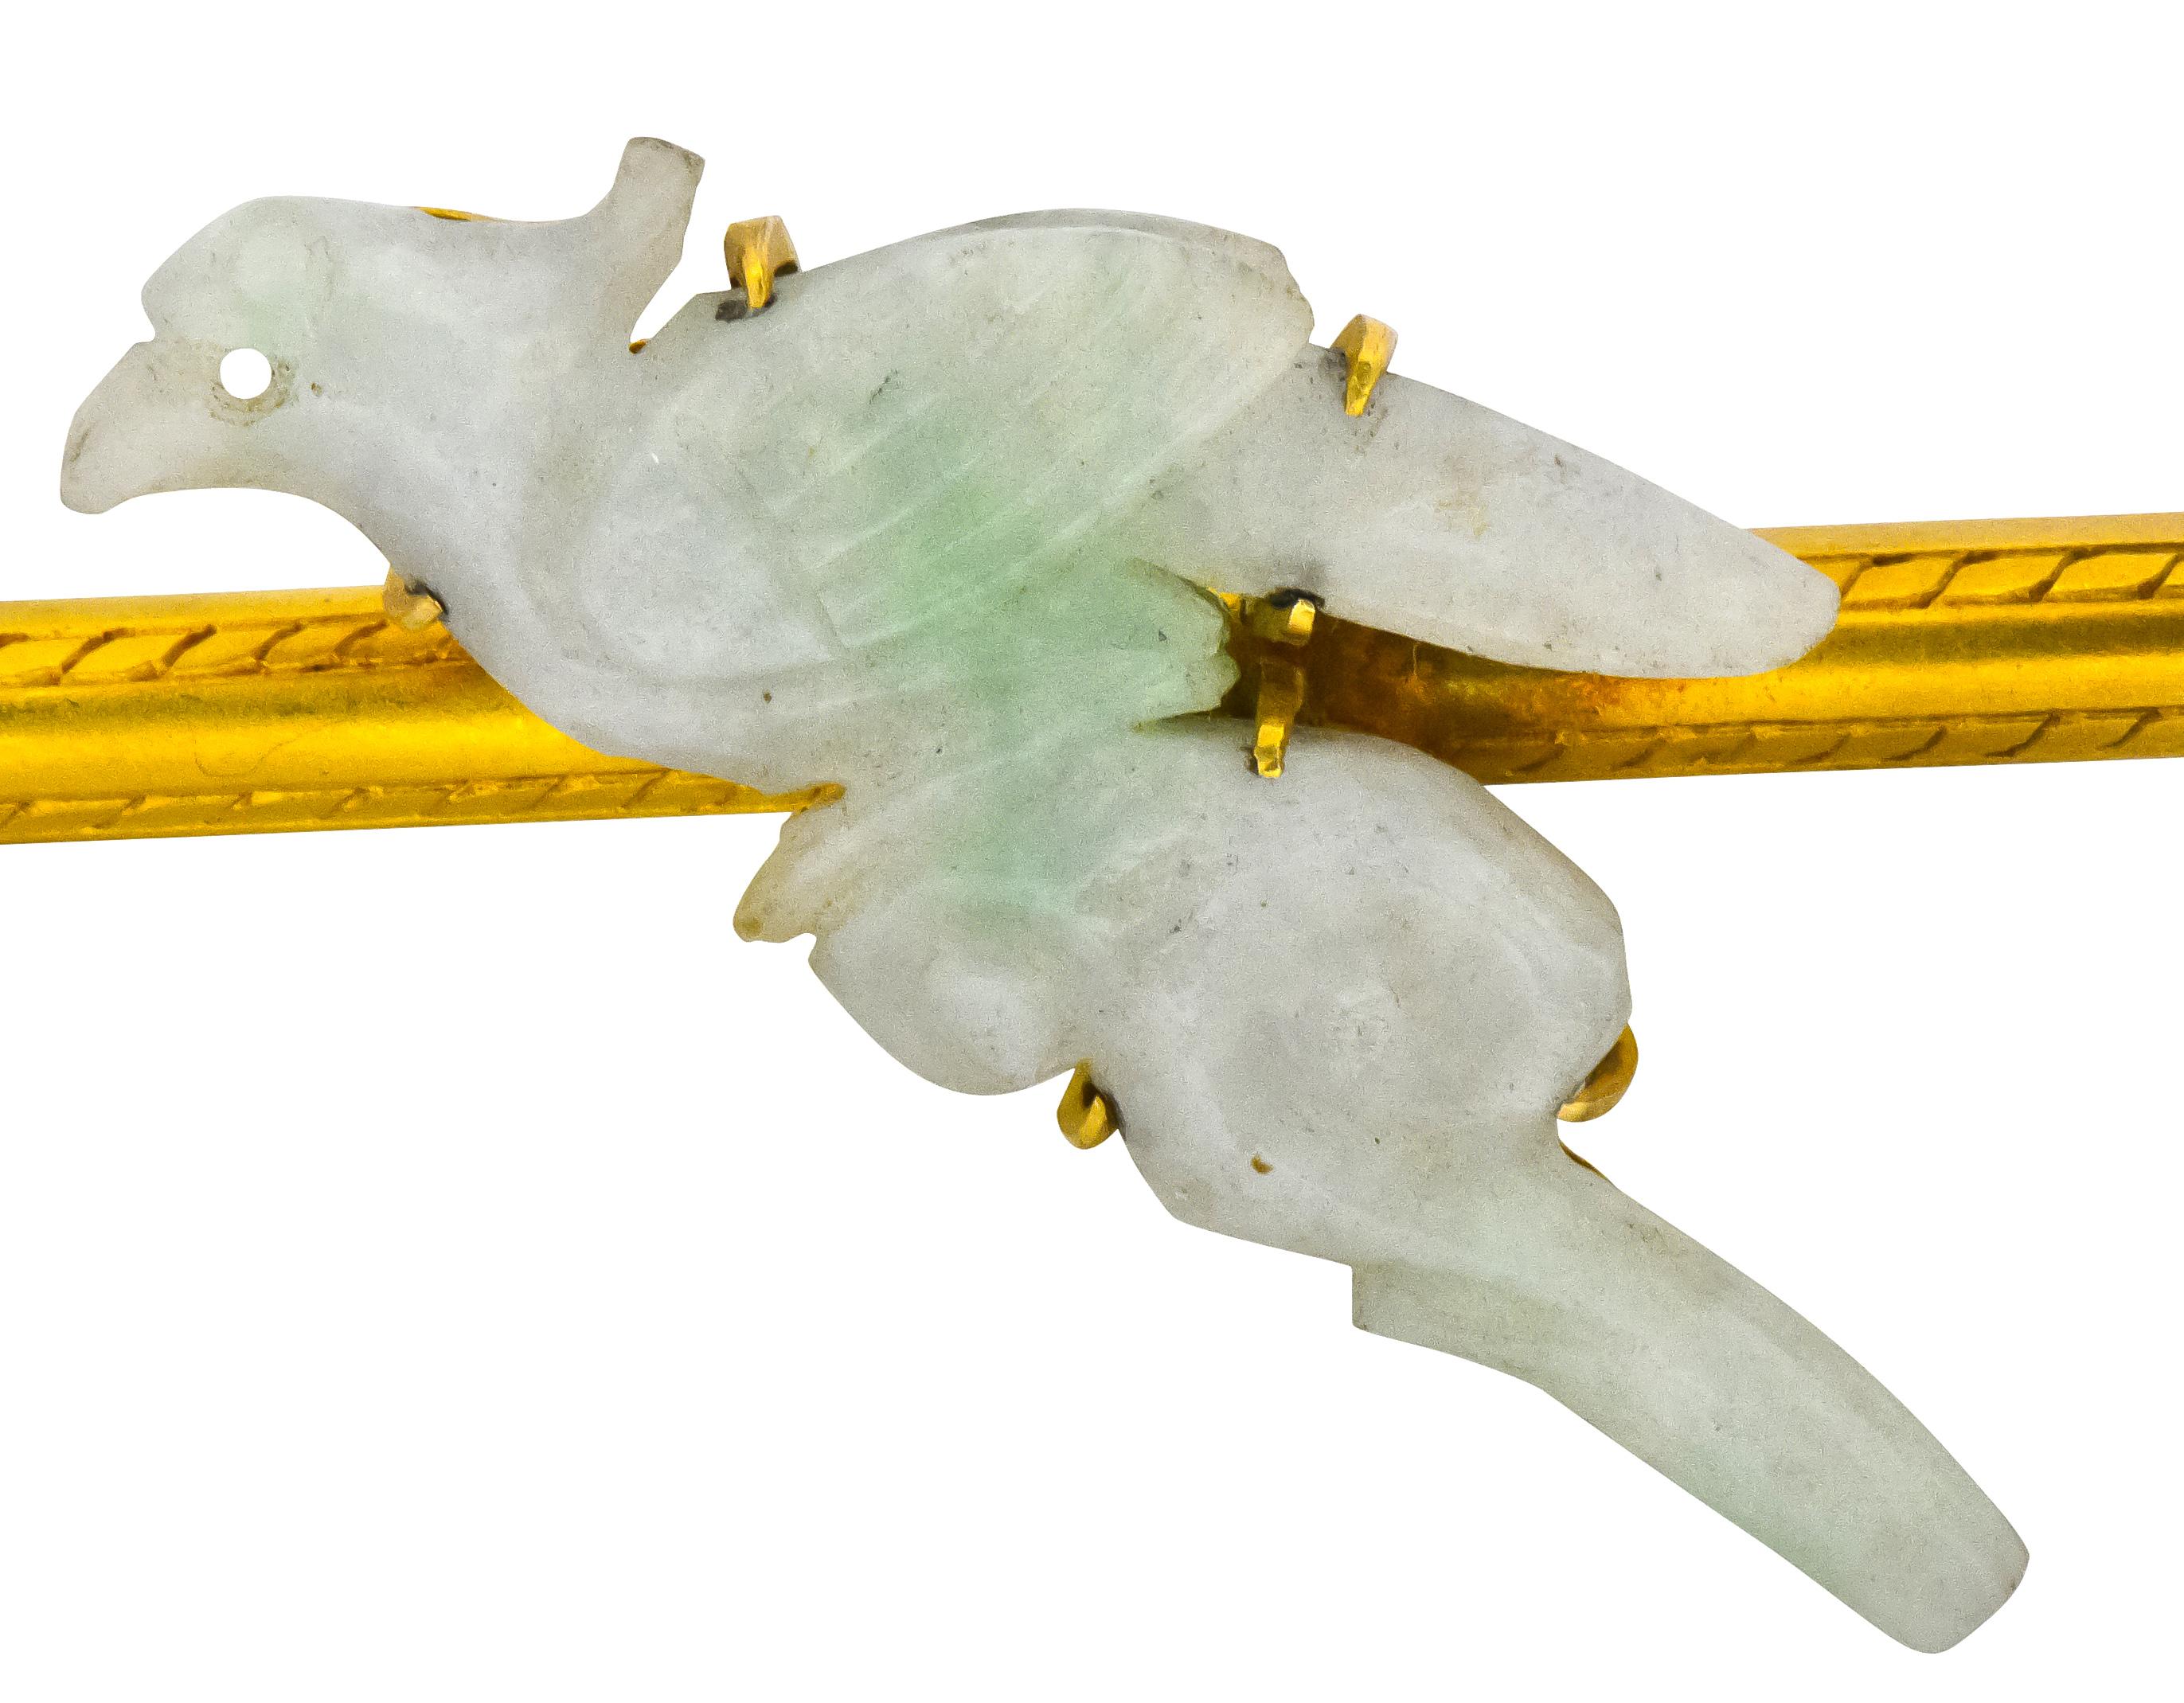 Centering a claw set, carved jade bird on branch, light sage green with mild mottling and good polish

Accompanied by matte, yellow gold bar terminating in domes with striped engraving throughout

Completed by pin-stem and closure

Tested as 18